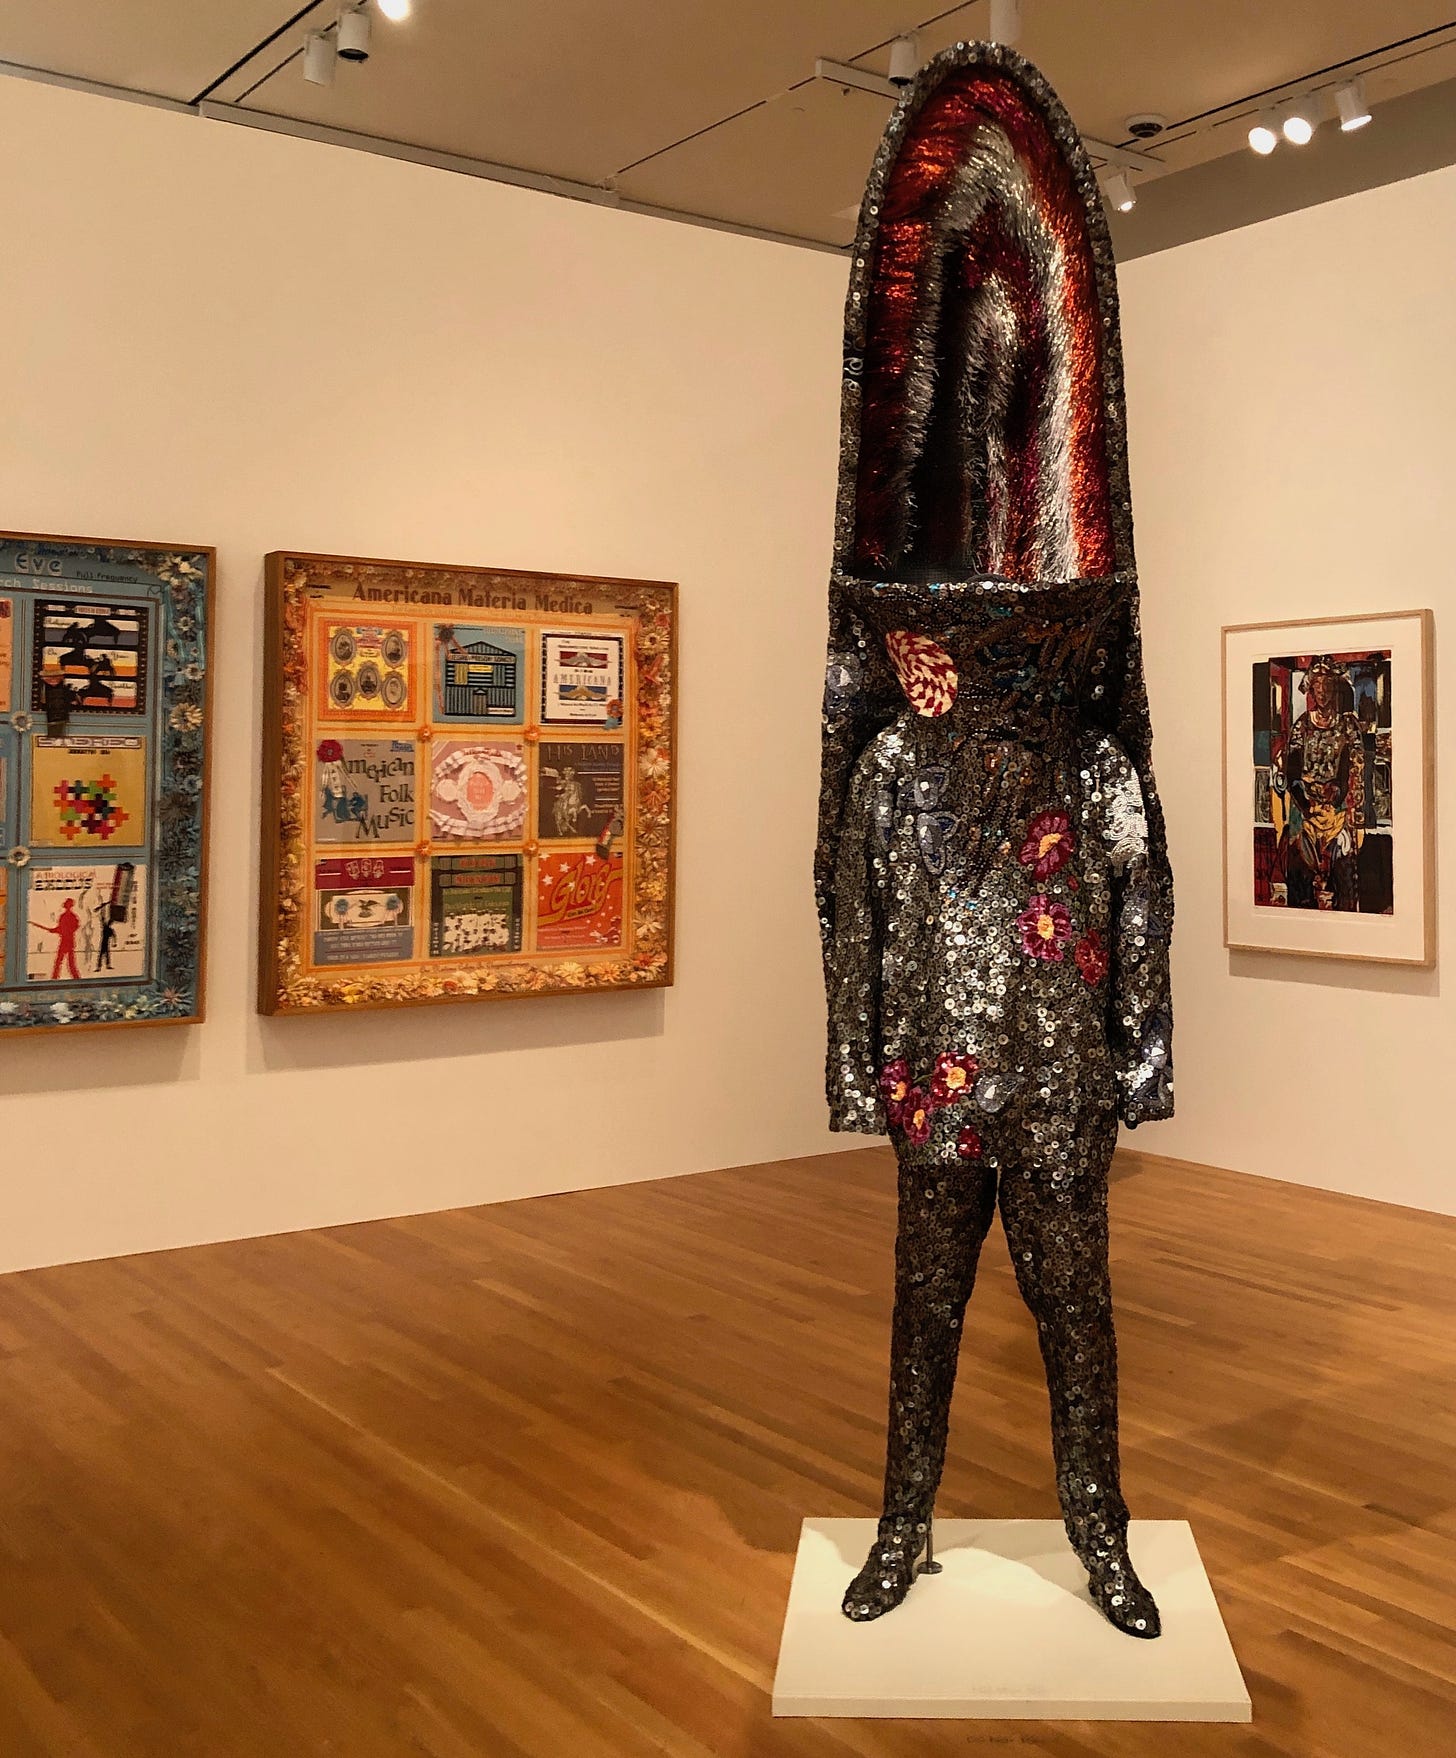 A glistening, full-body costume with an enormous headdress, in a museum gallery. Three artworks are on the walls behind.